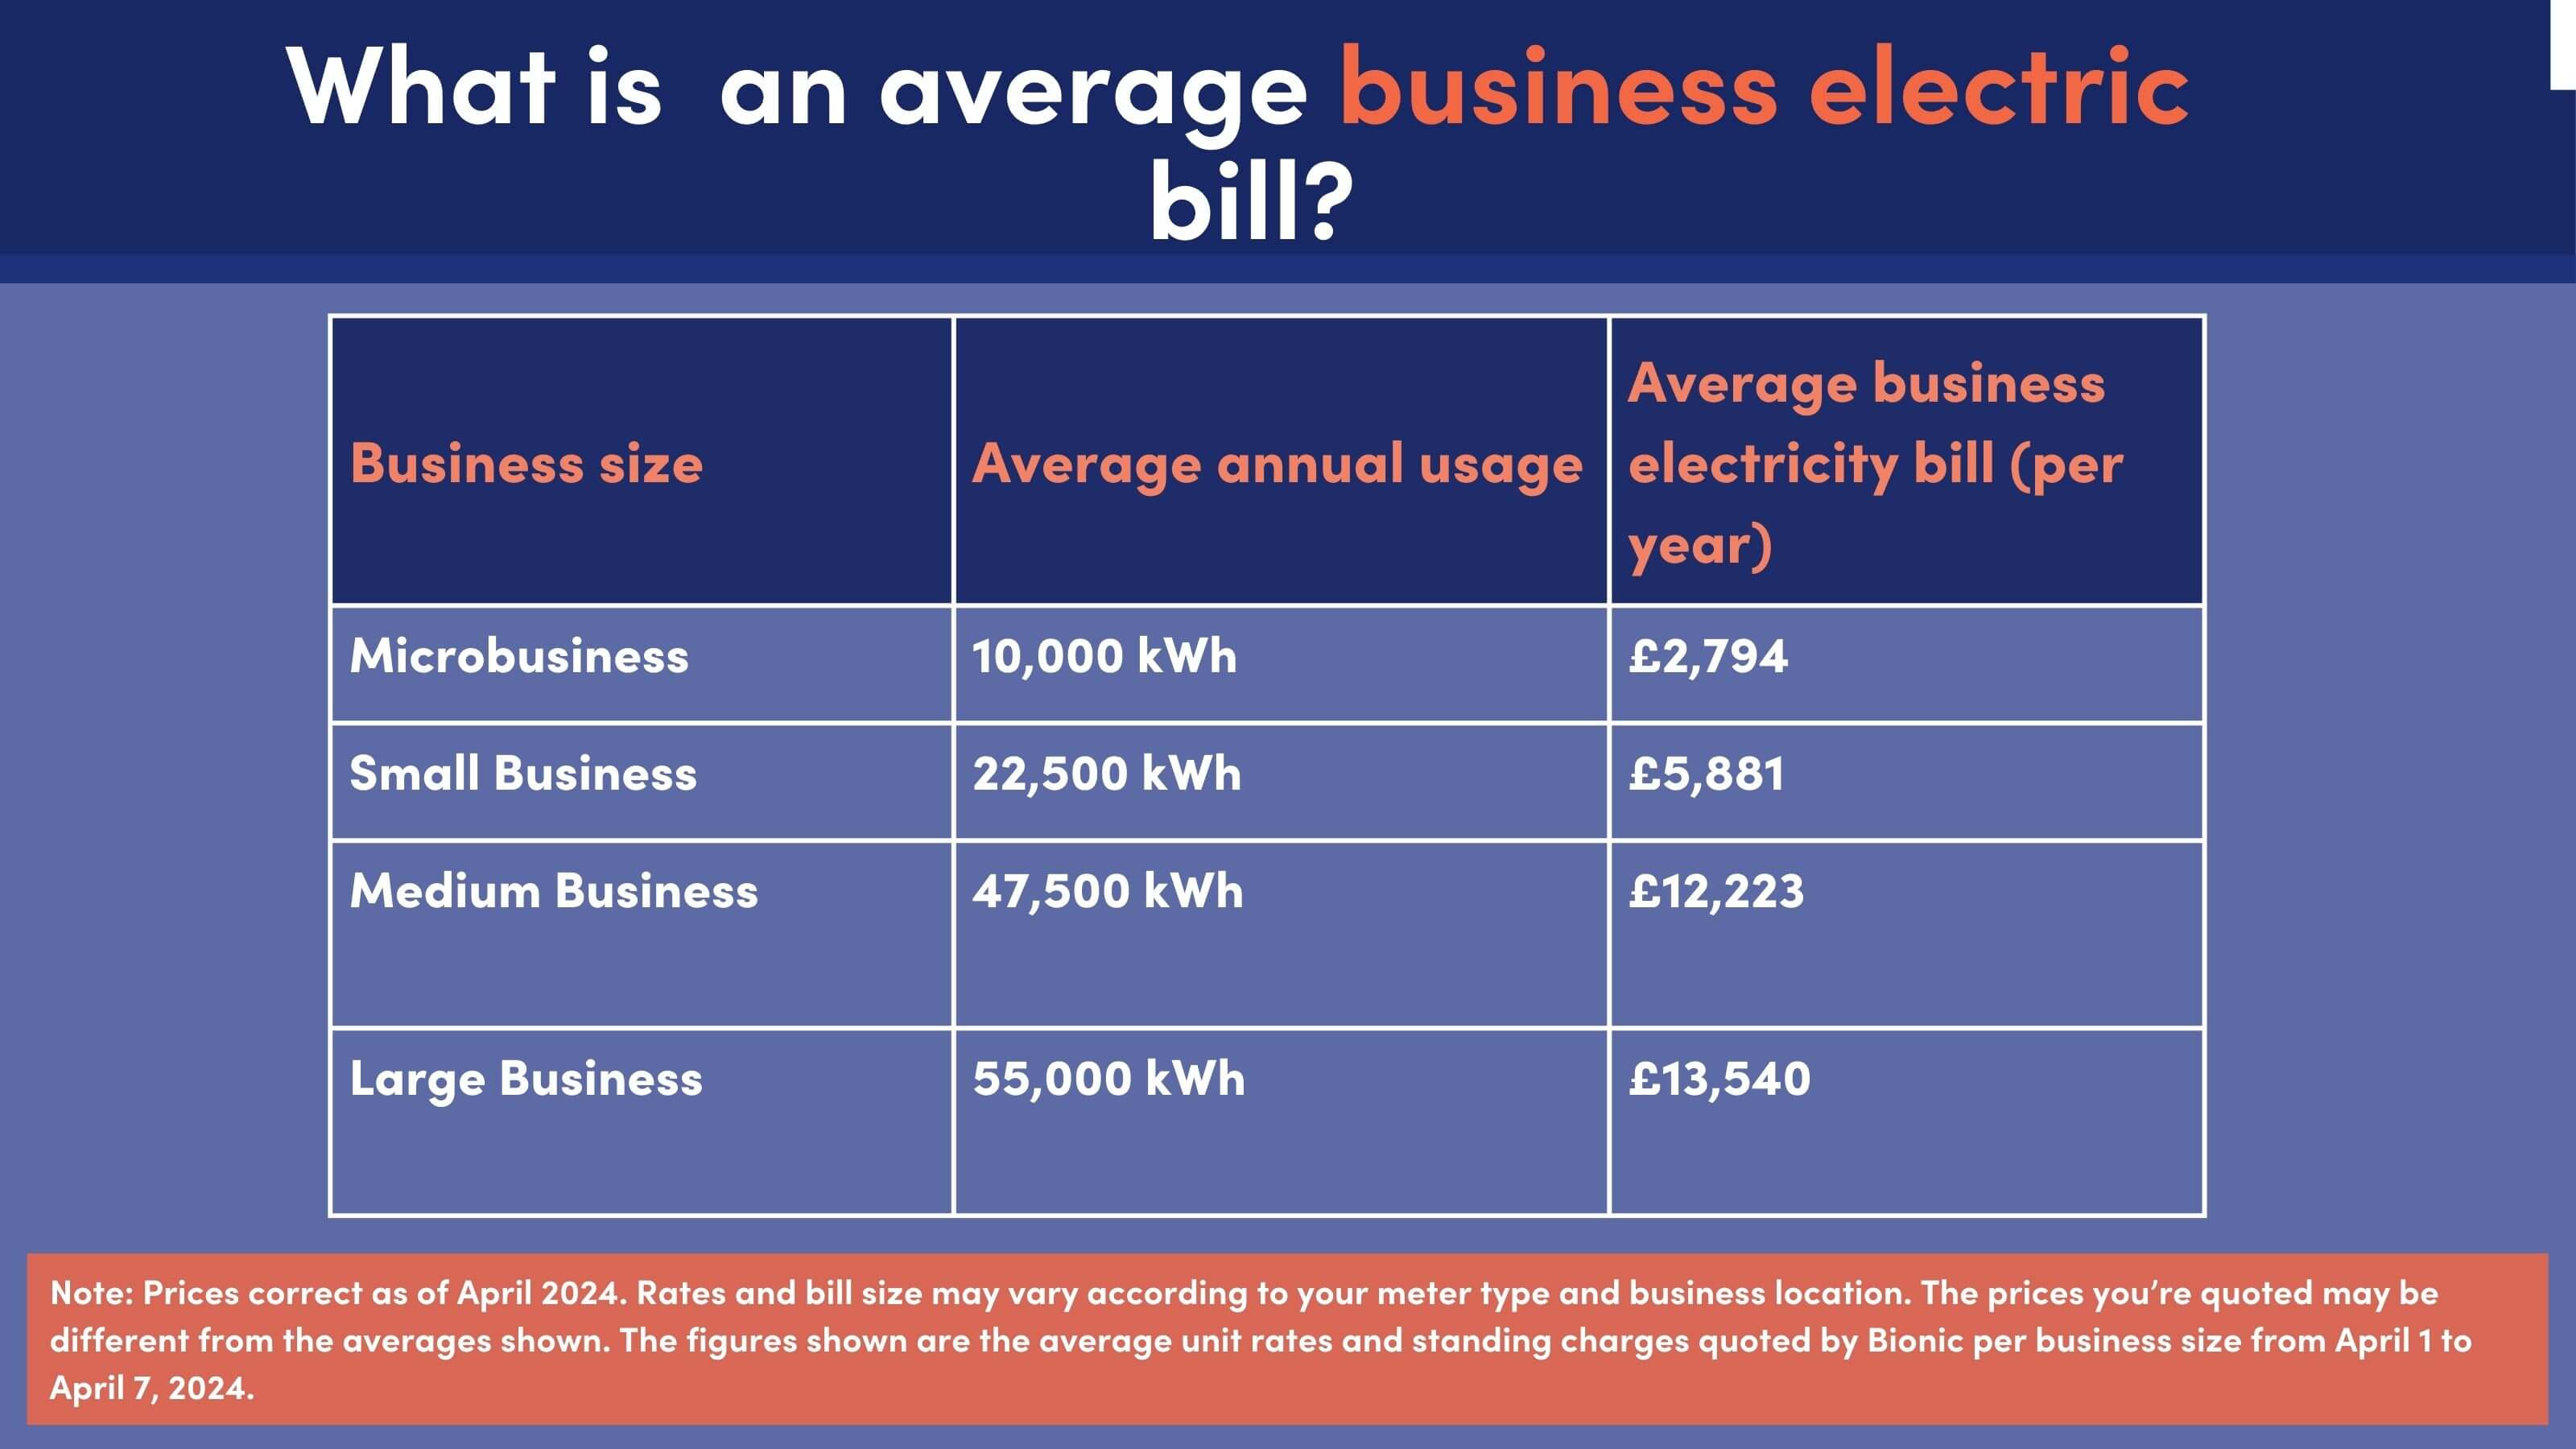 Average business electricity bill rates for different sized businesses